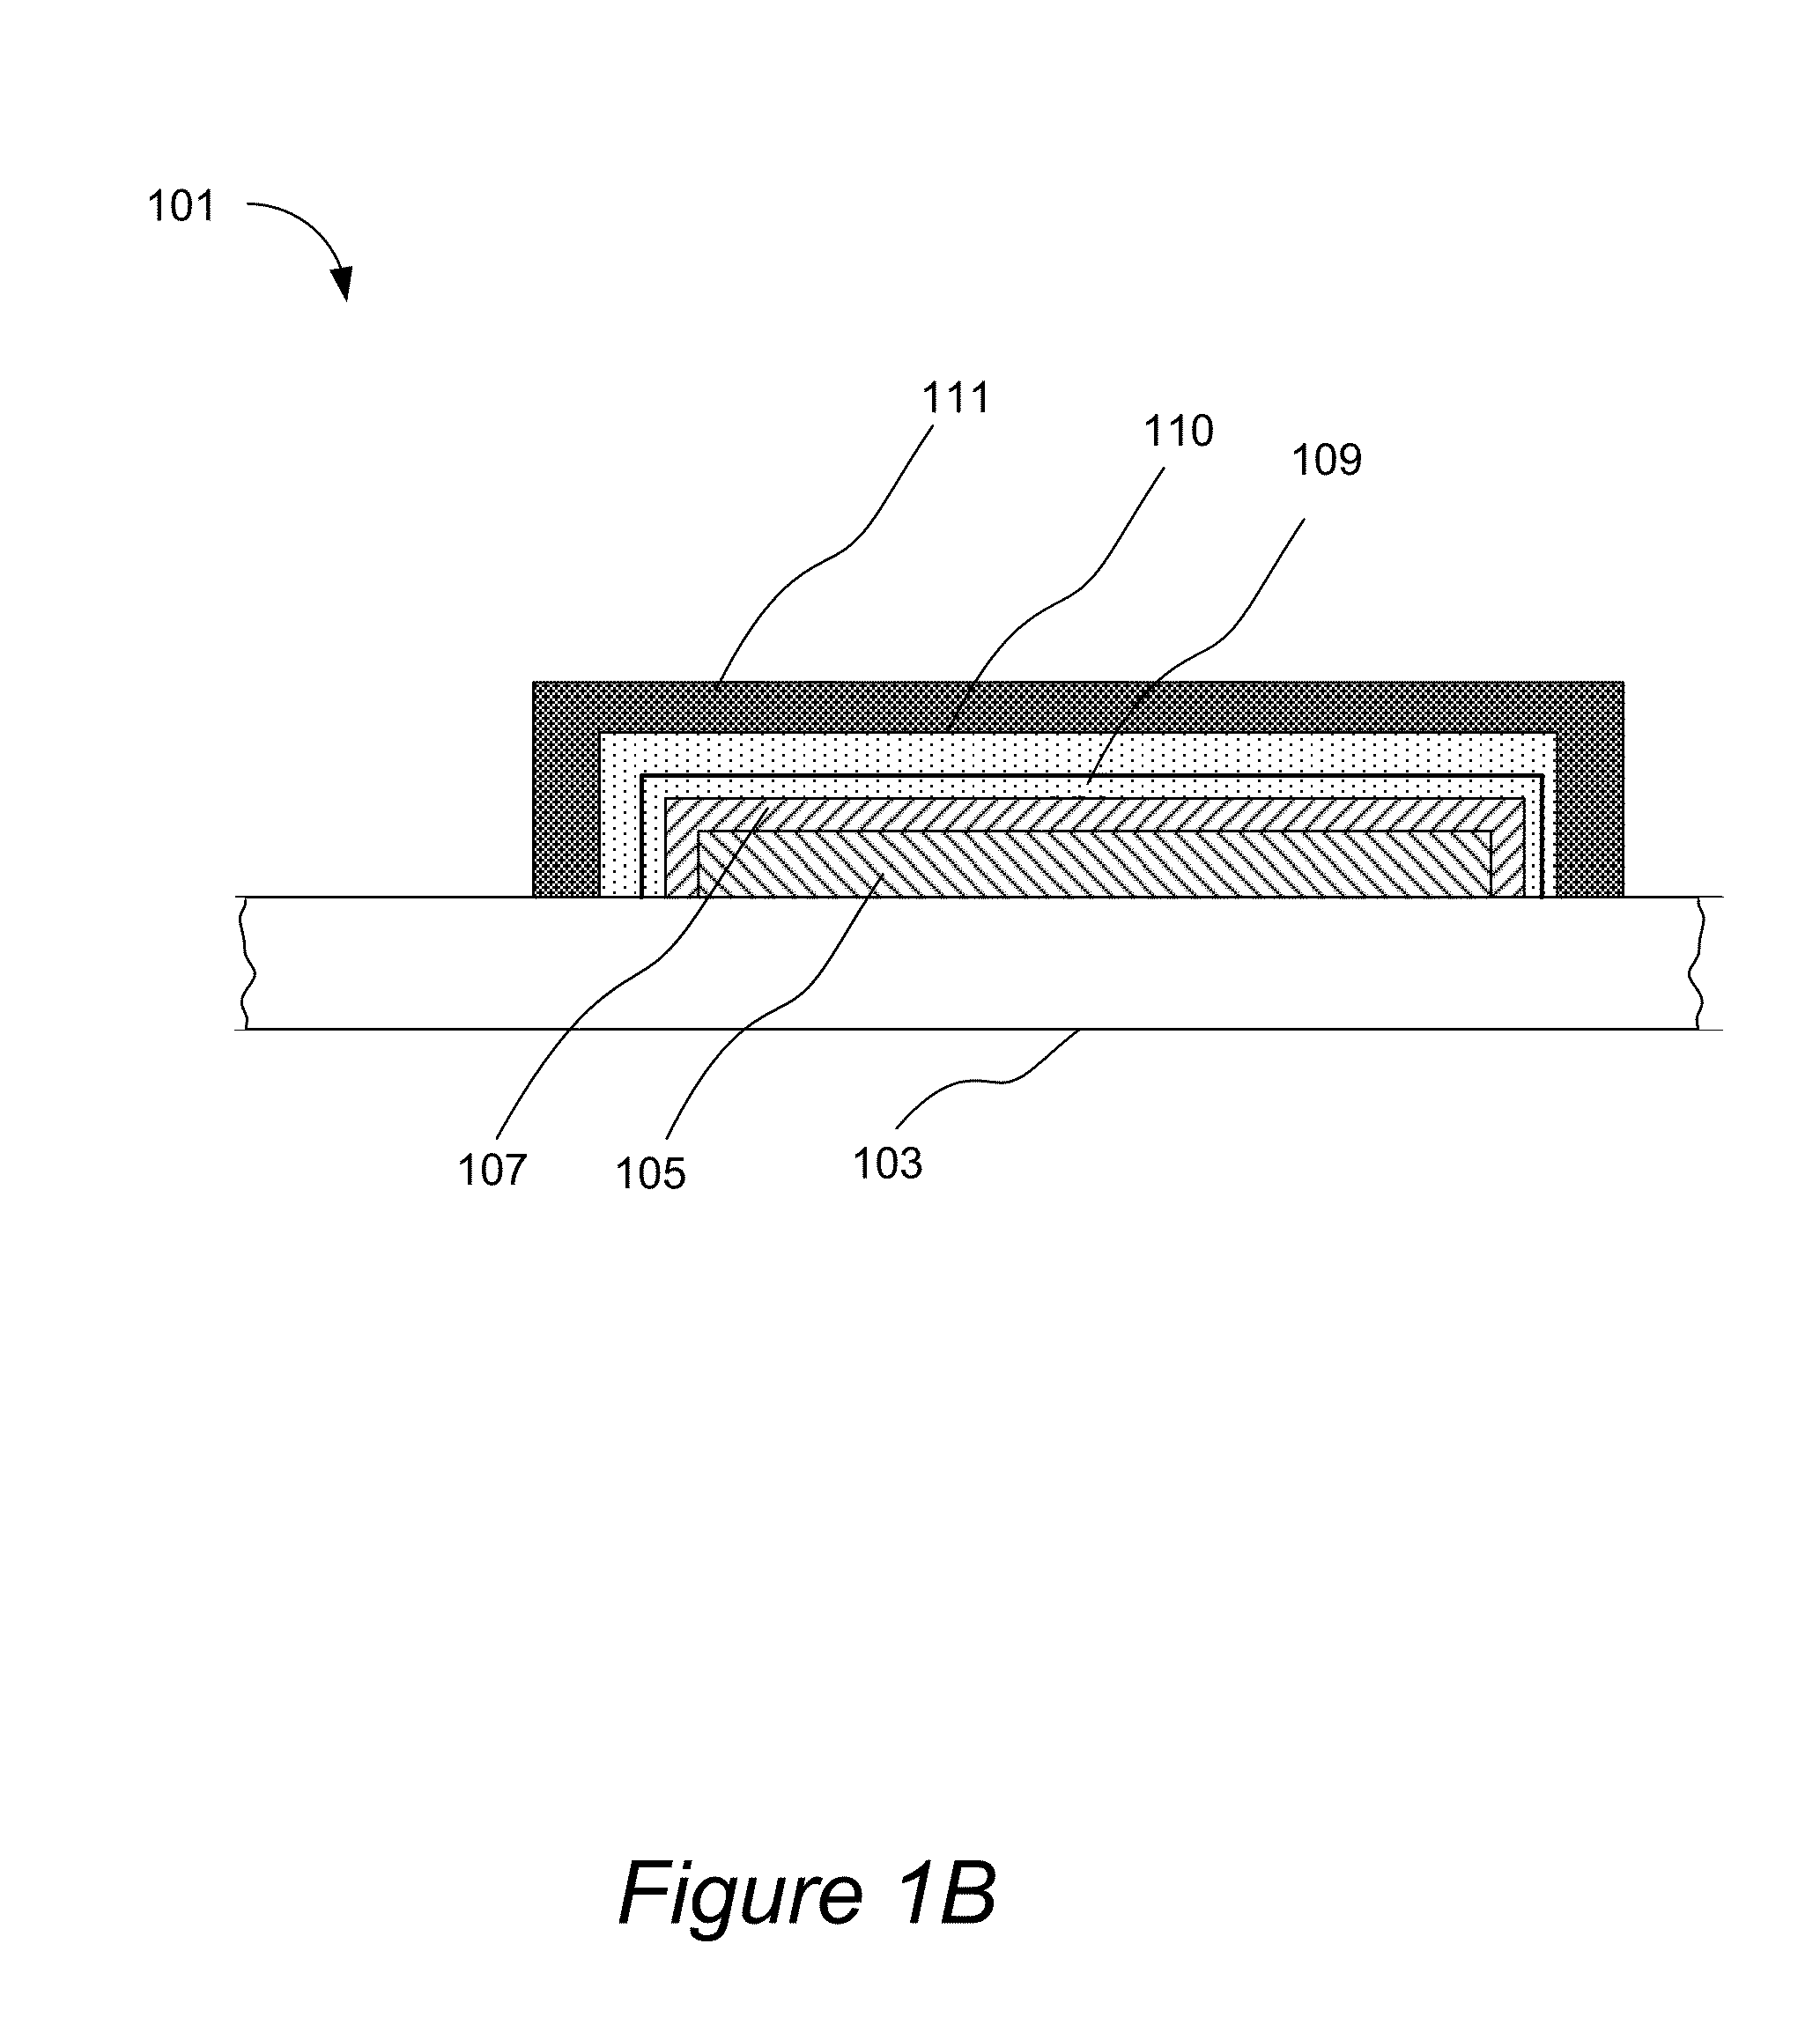 Two-terminal electronic devices and their methods of fabrication